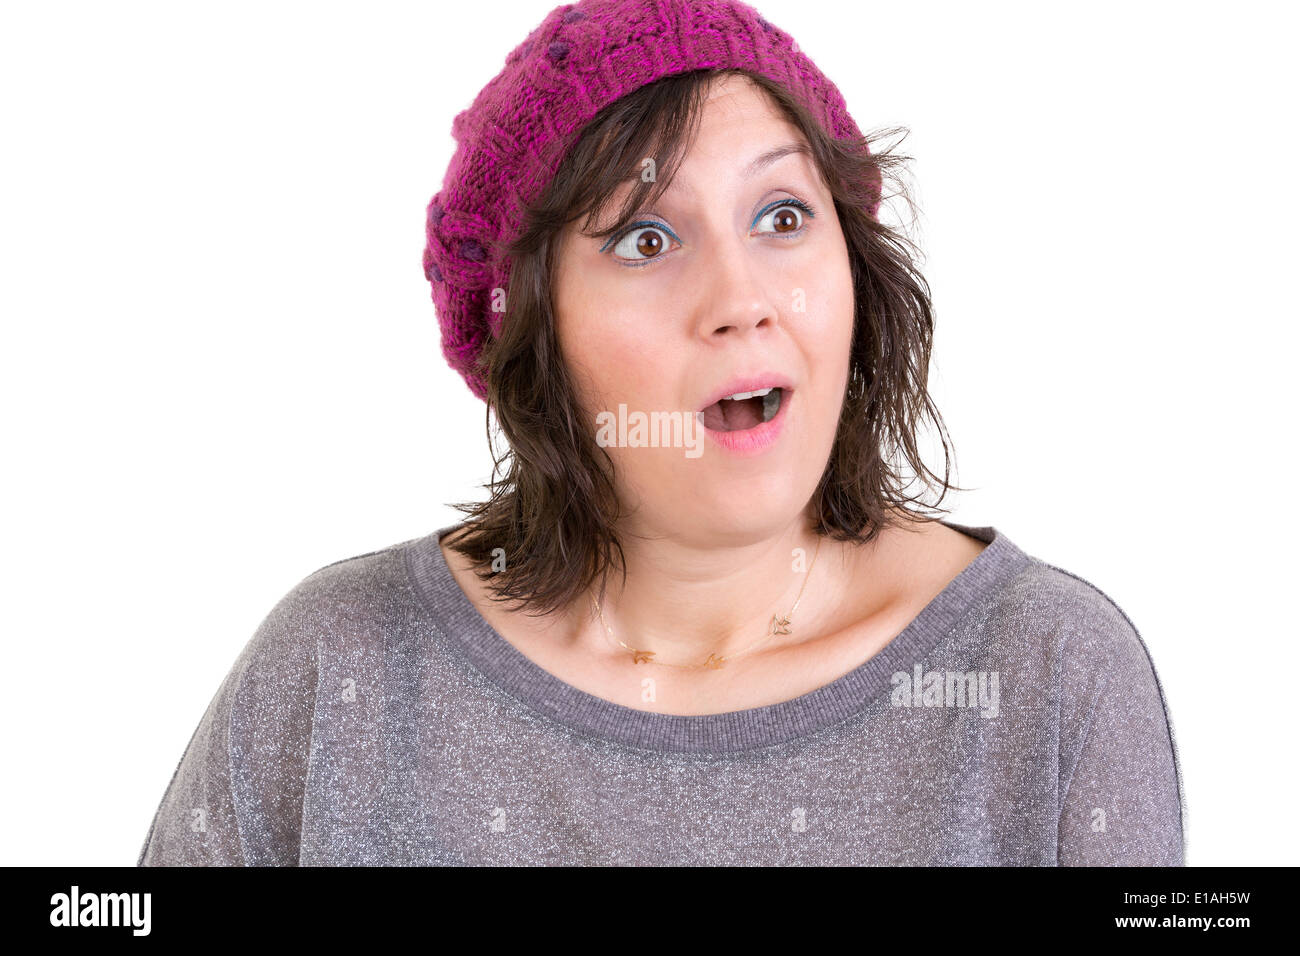 Woman with a look of wonder and amazement with wide eyes and an open mouth reacting in startled surprise isolated on white Stock Photo